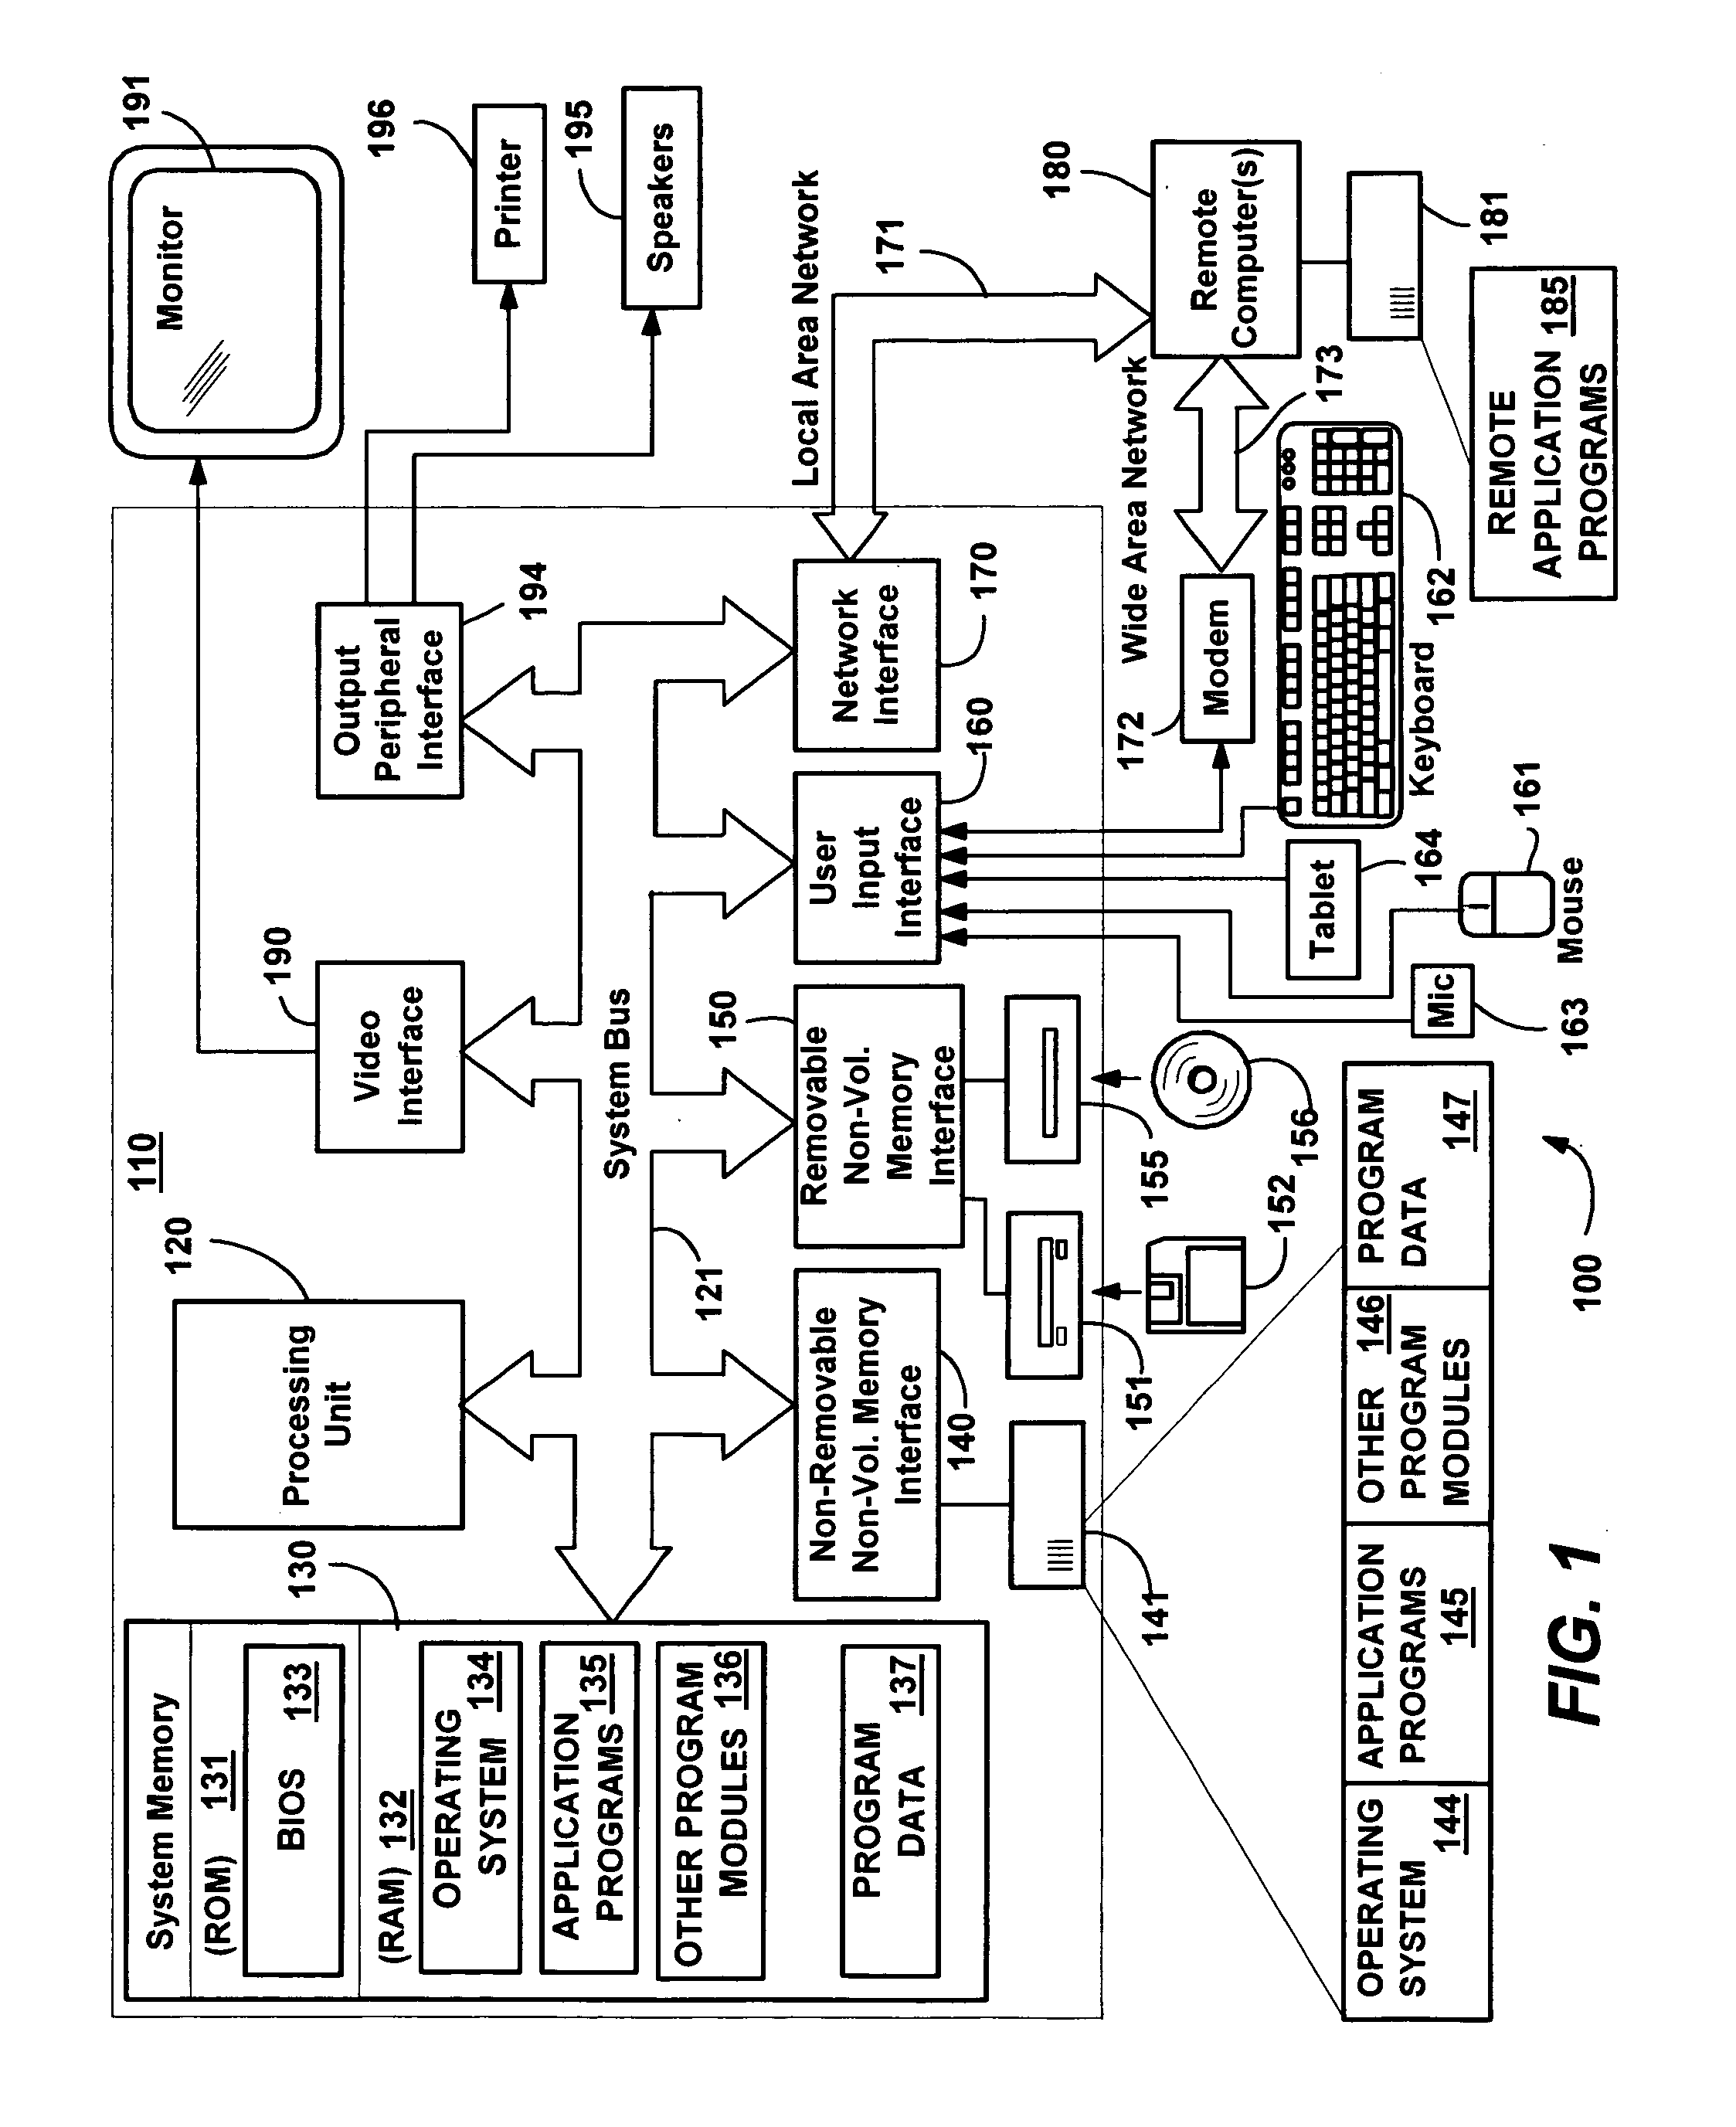 Method and system for synchronizing cached files